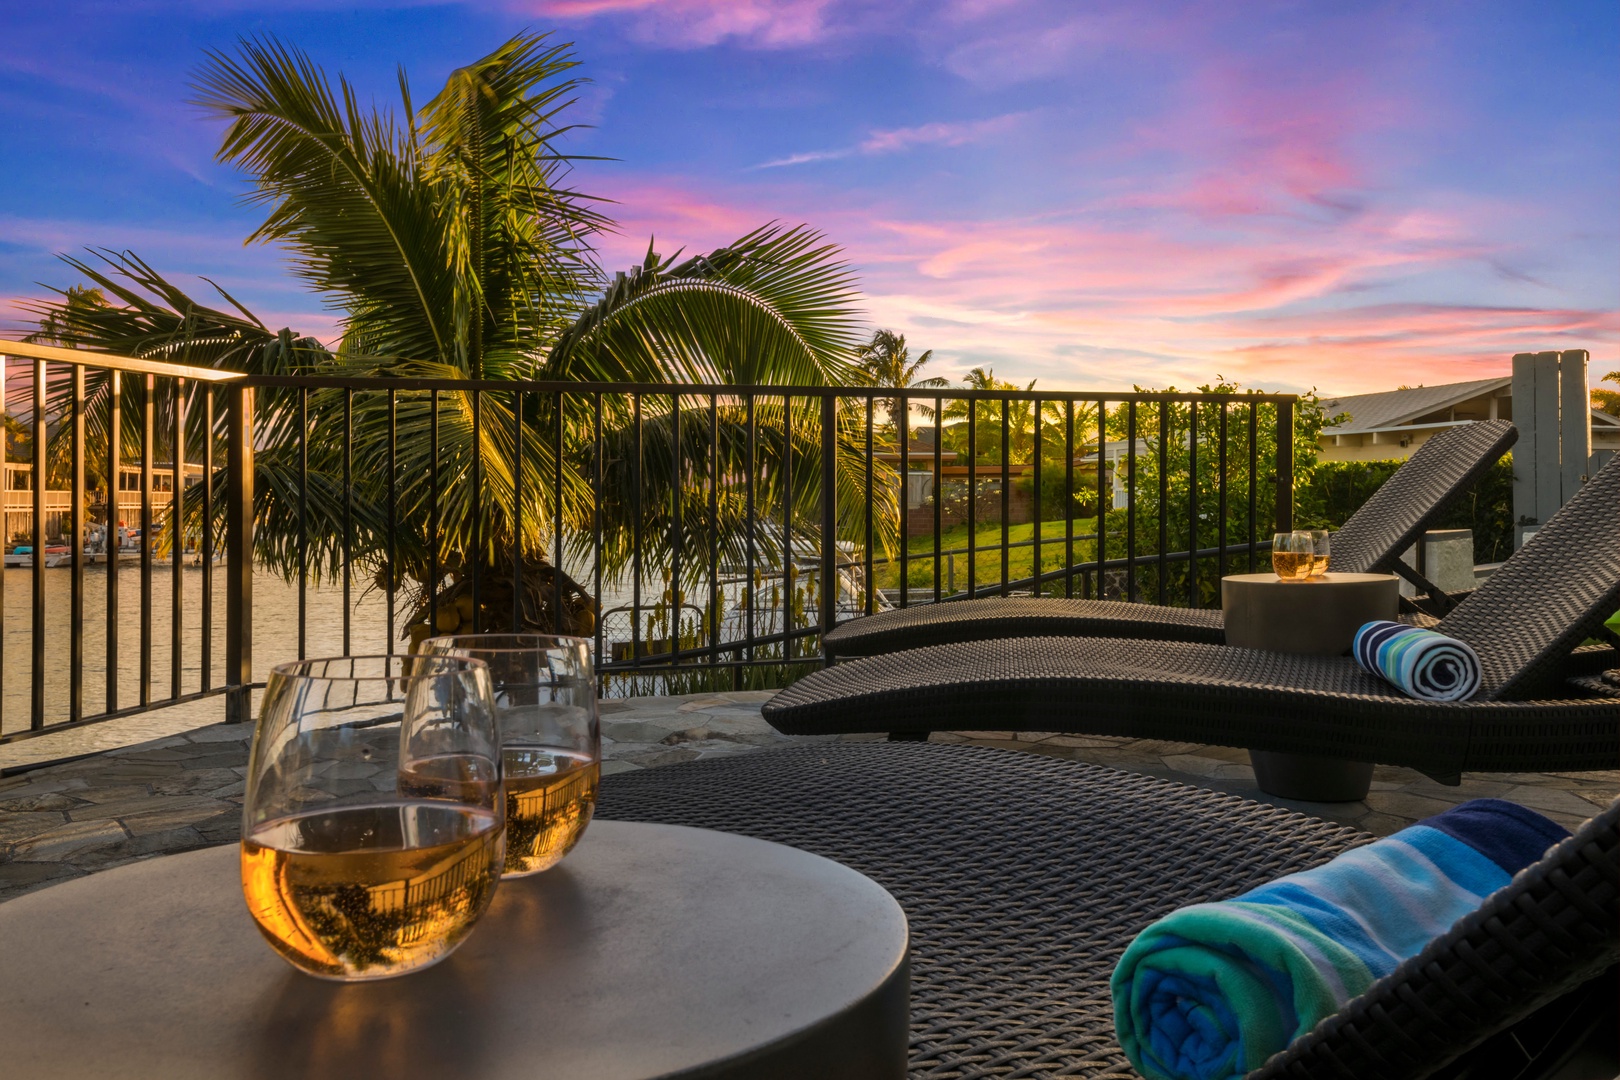 Honolulu Vacation Rentals, Holoholo Hale - Check out the sun deck with marina views. Perfect spot to catch the sunrise and sunset sky!